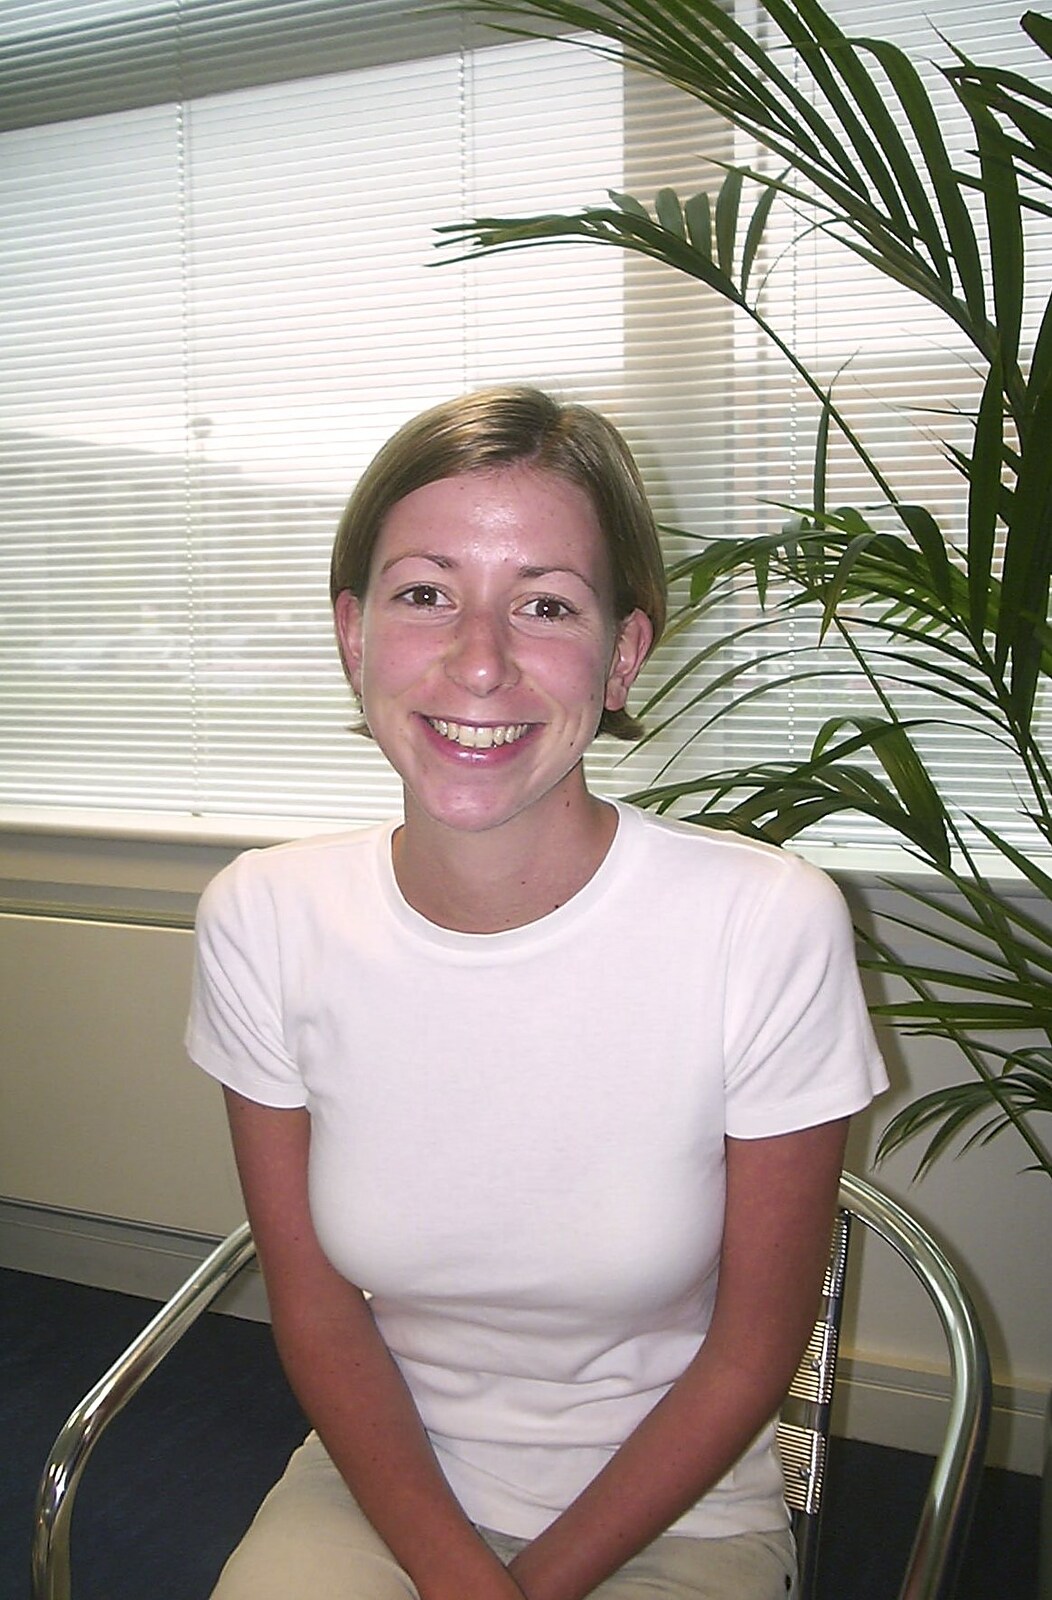 Lucy in the Qualcomm office from Mark Joseph at Revs, and the BSCC at Hoxne and Wortham - 30th September 2004